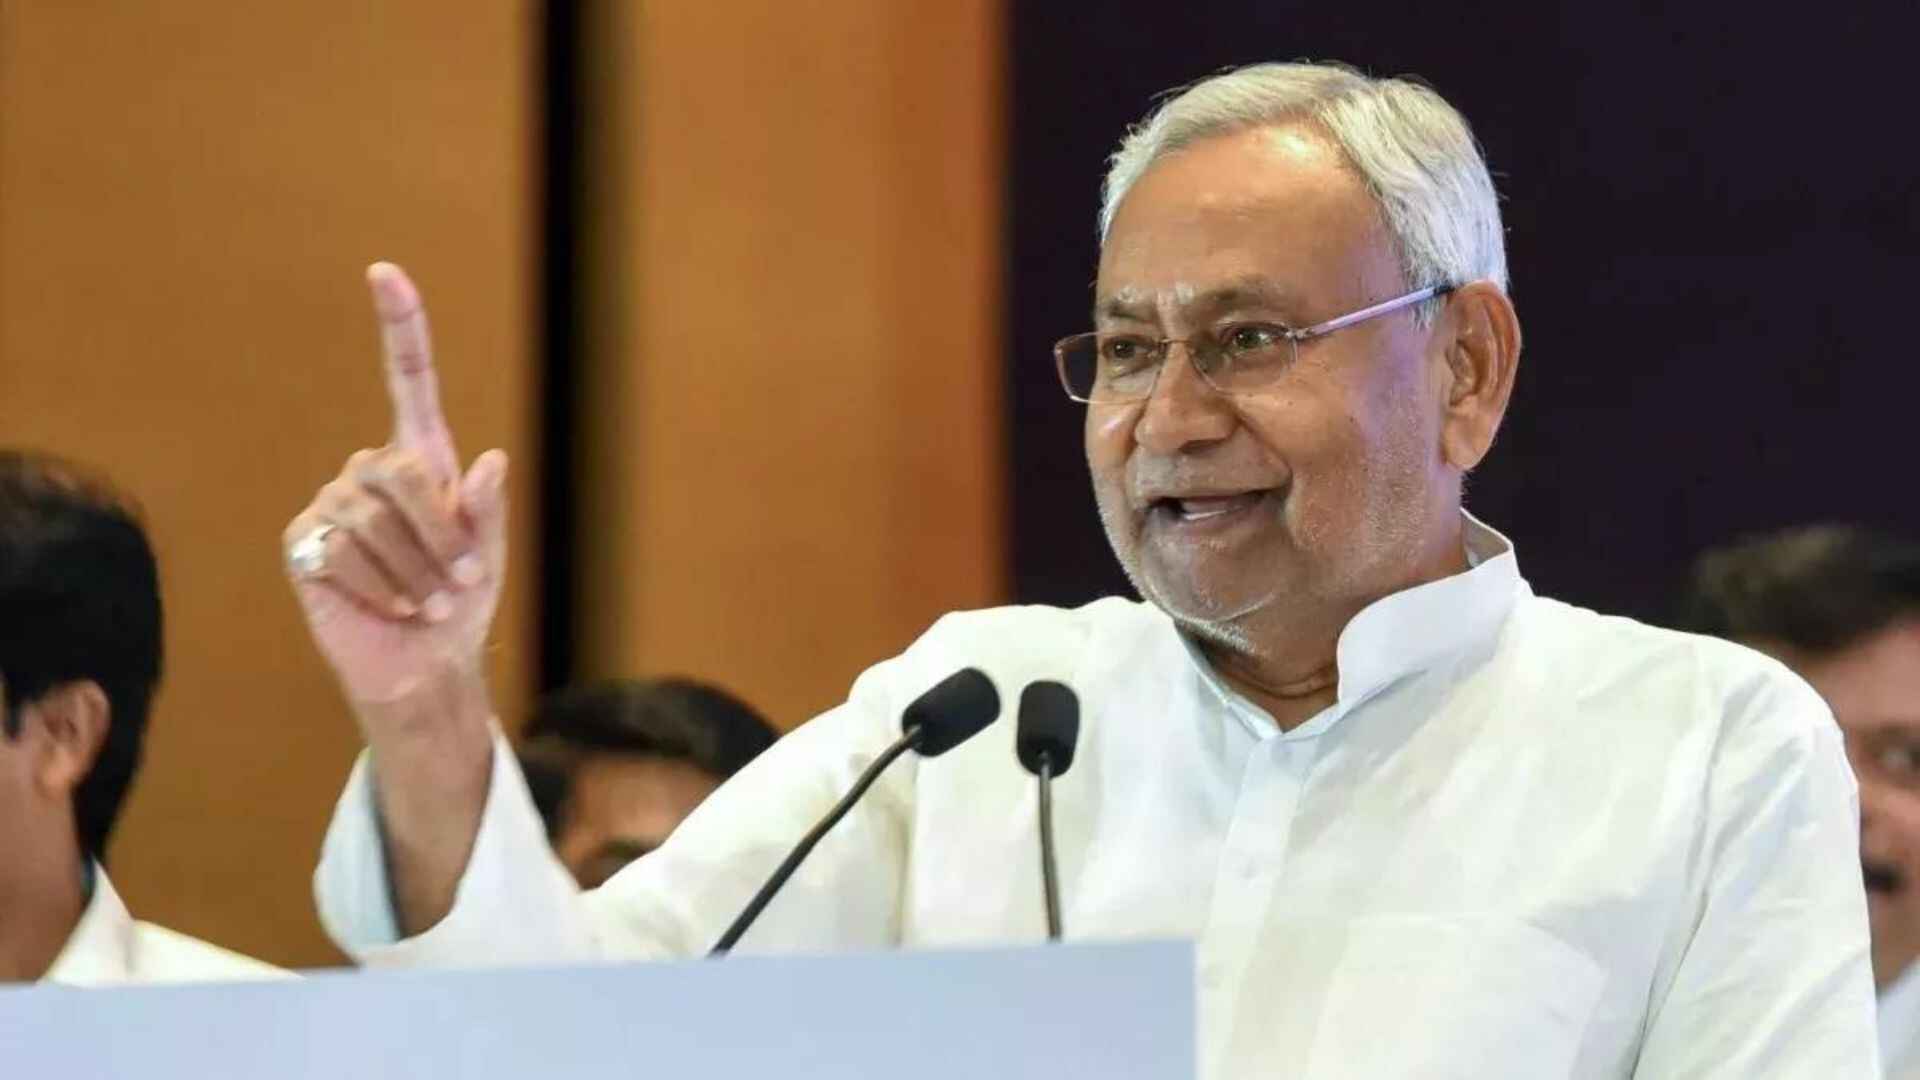 INDIA Bloc Extends Deputy PM Offer To Nitish Kumar?: Sources